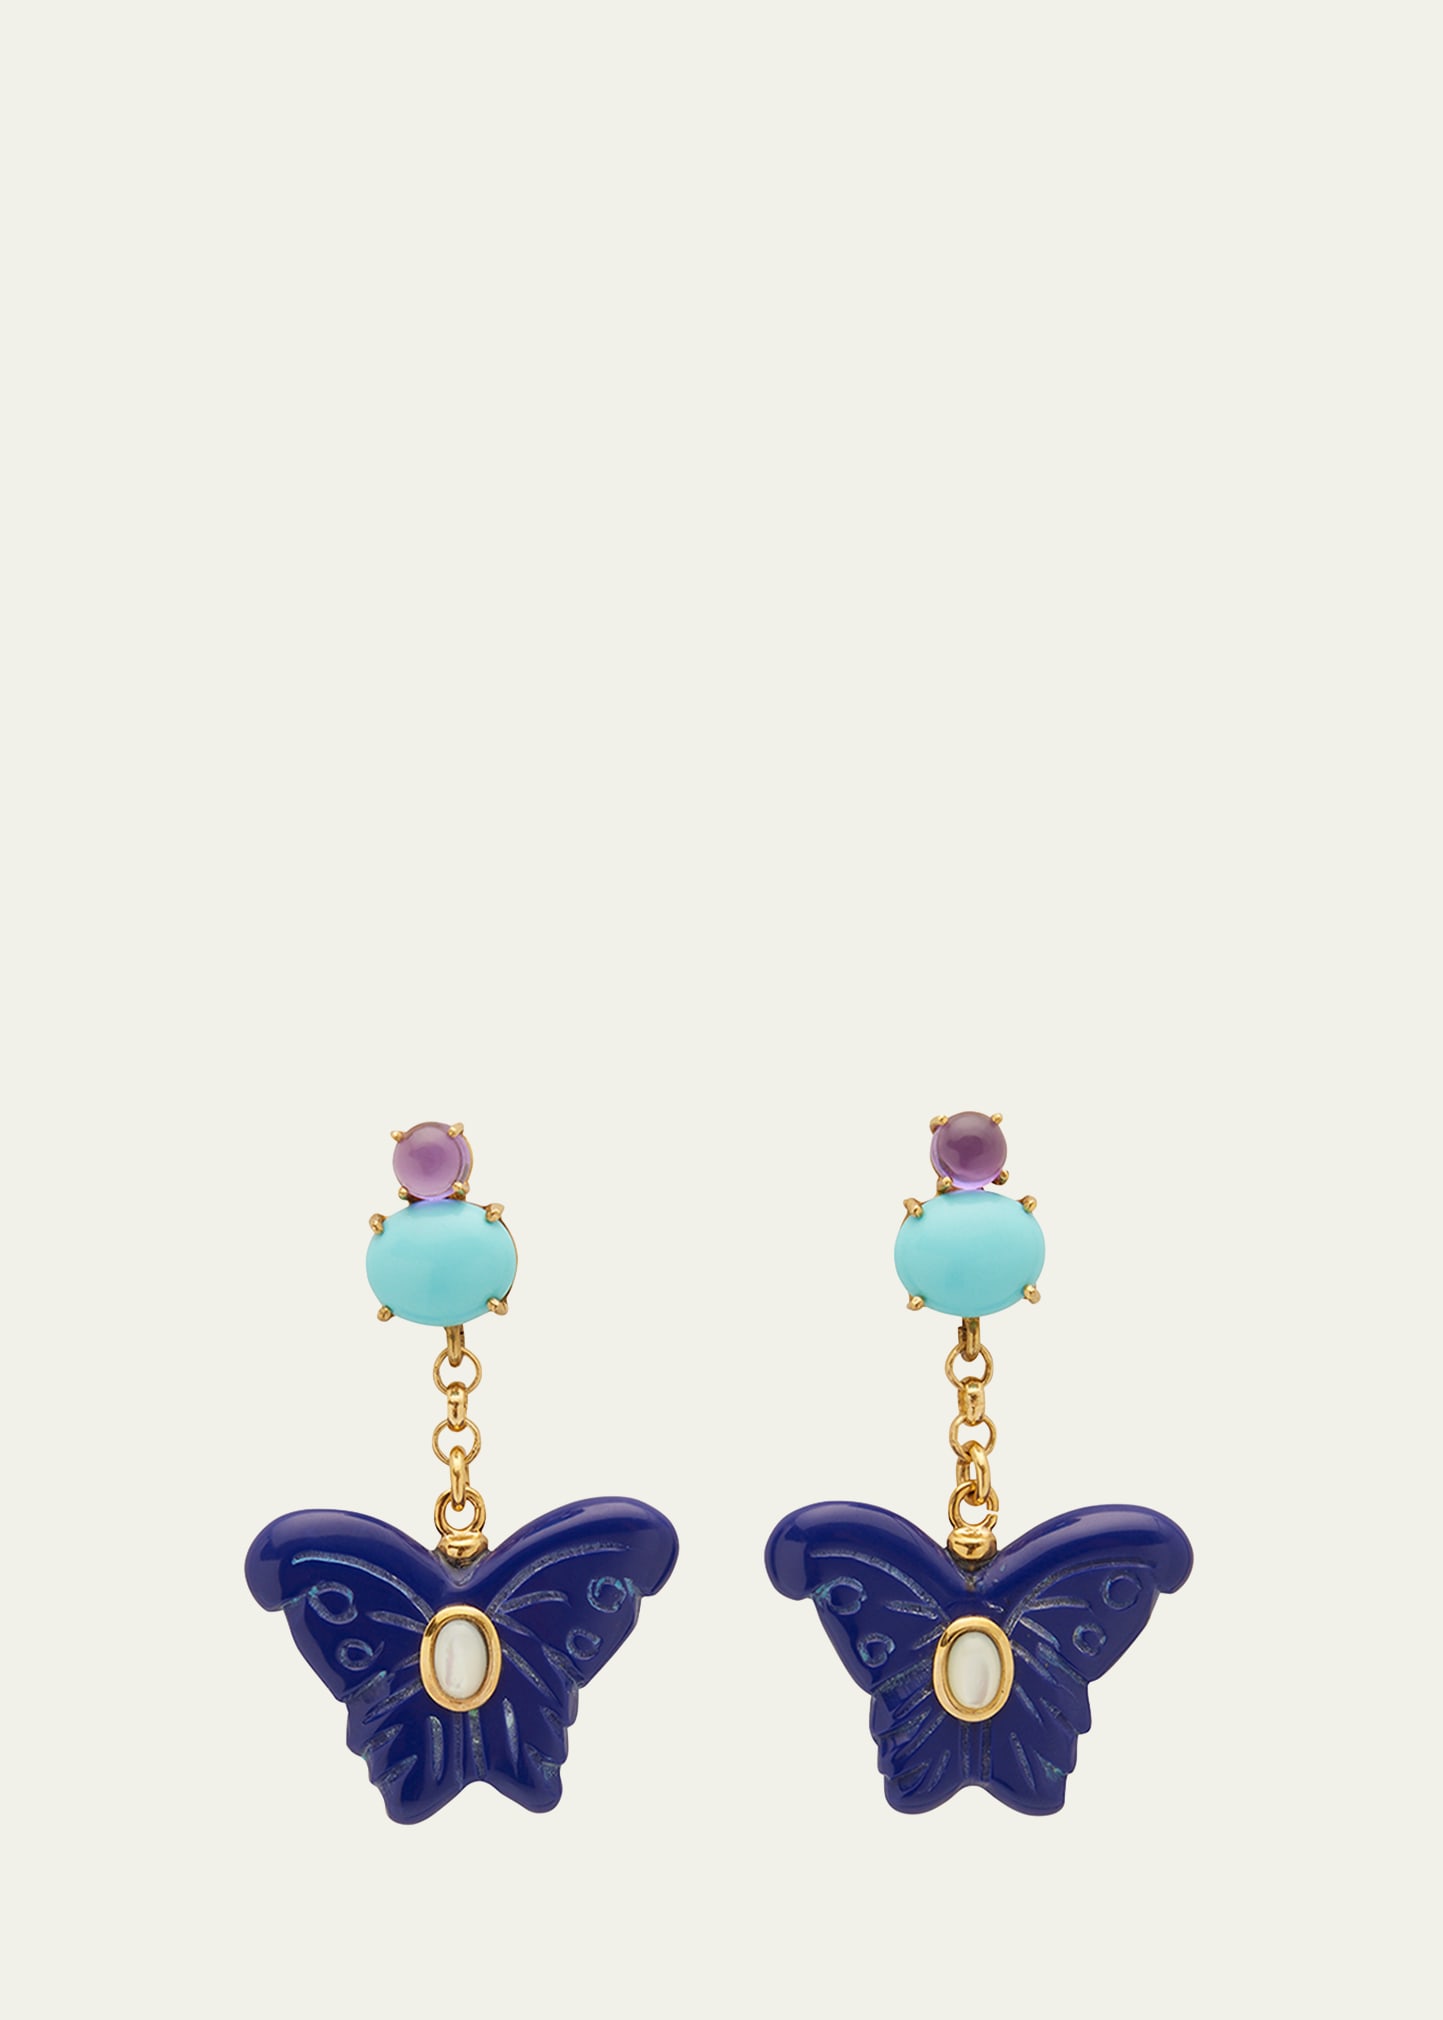 Grazia And Marica Vozza Blue And Turquoise Colored Resin Butterfly Earrings In Multi